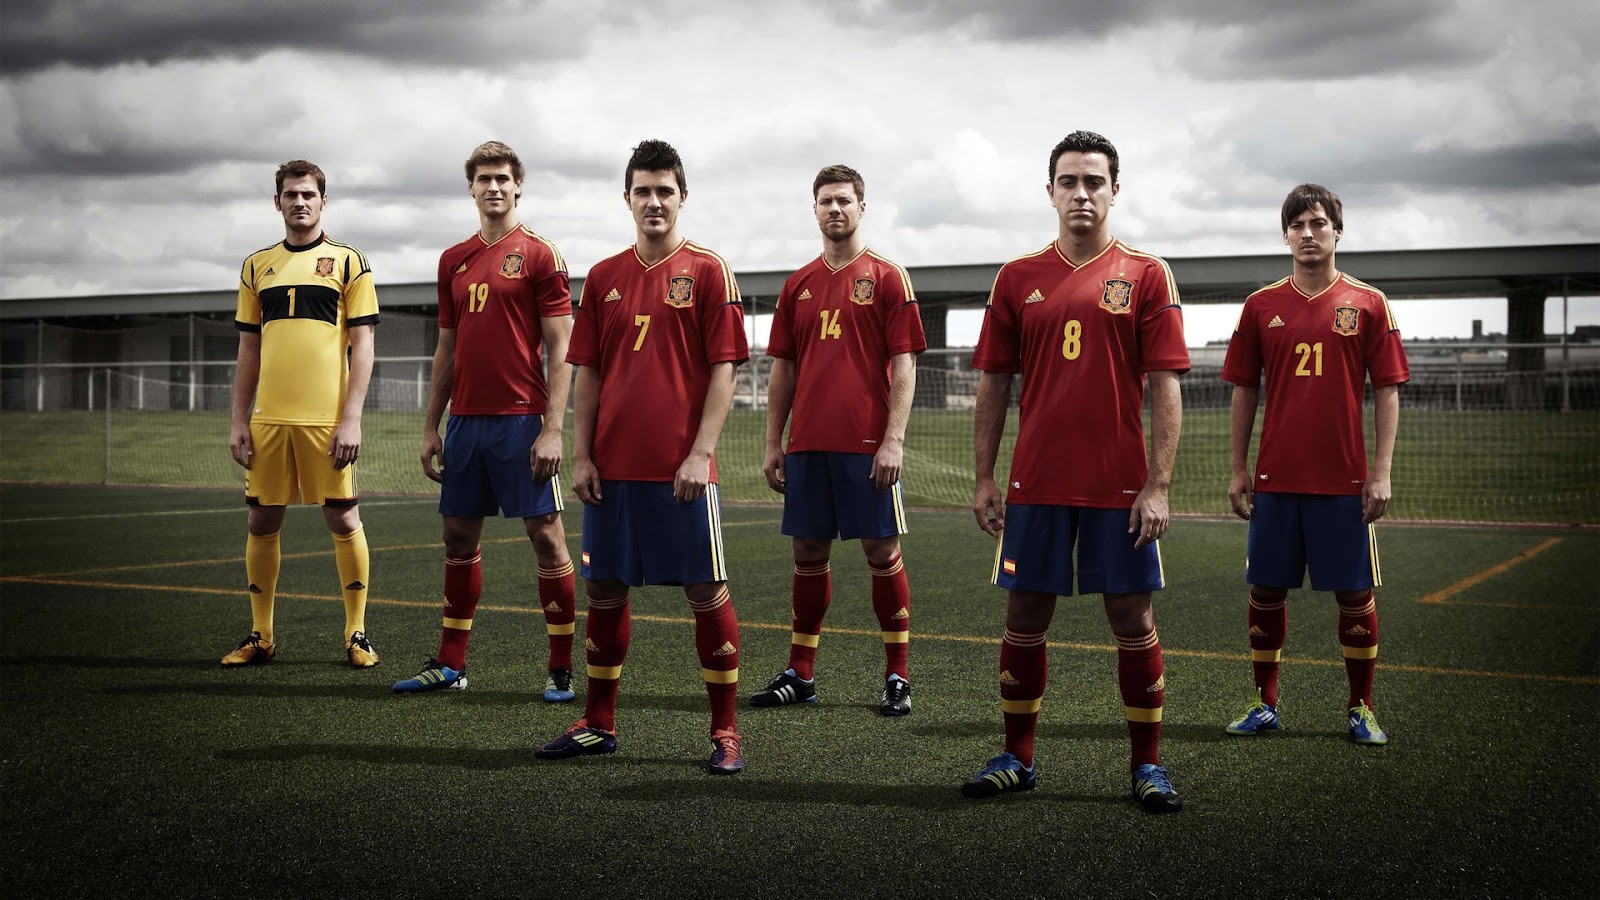 Spain Football Team High Quality Images